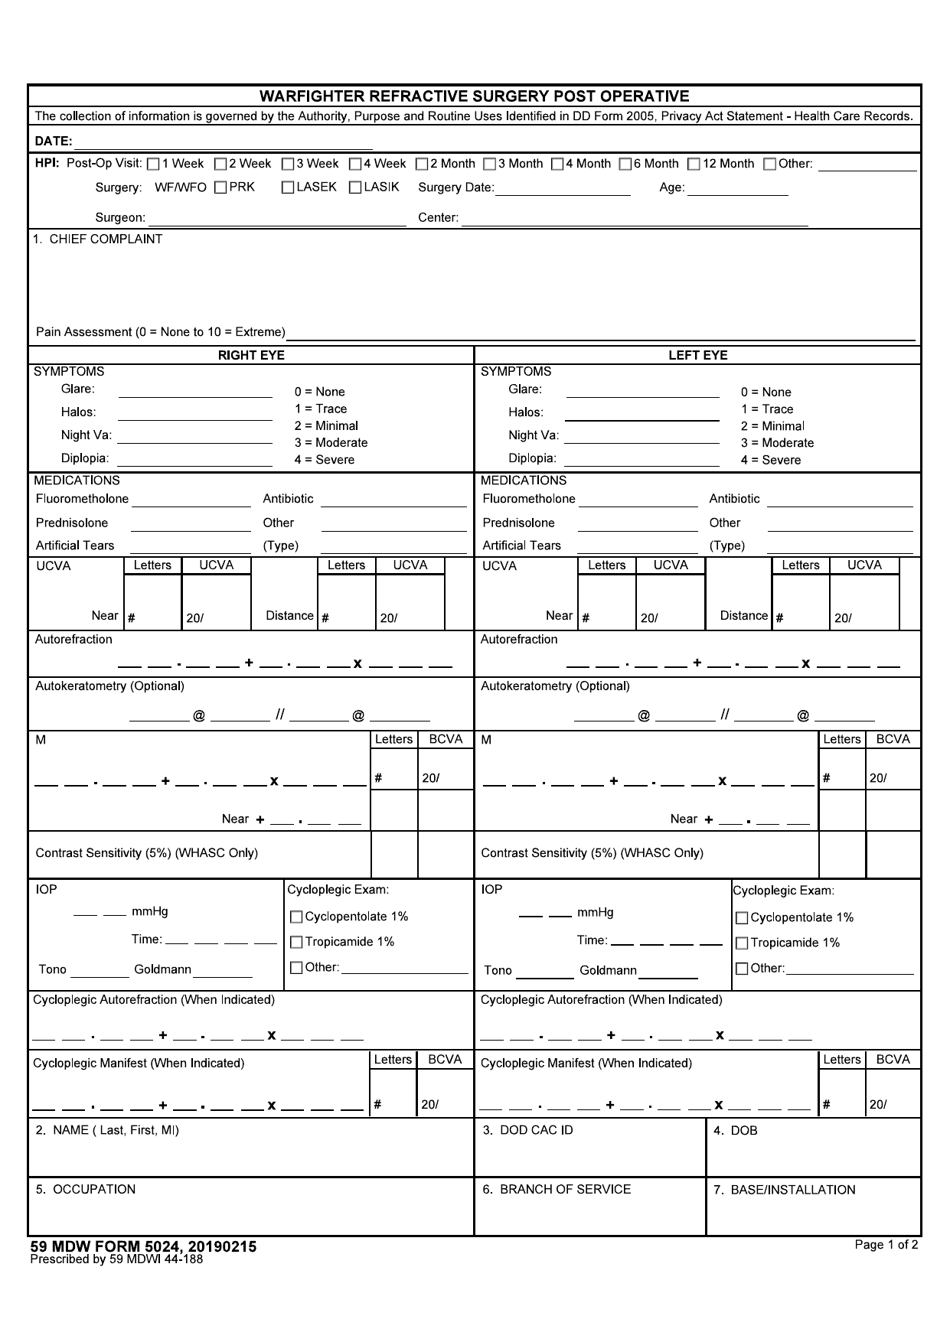 59 MDW Form 5024 Warfighter Refractive Surgery Post Operative, Page 1